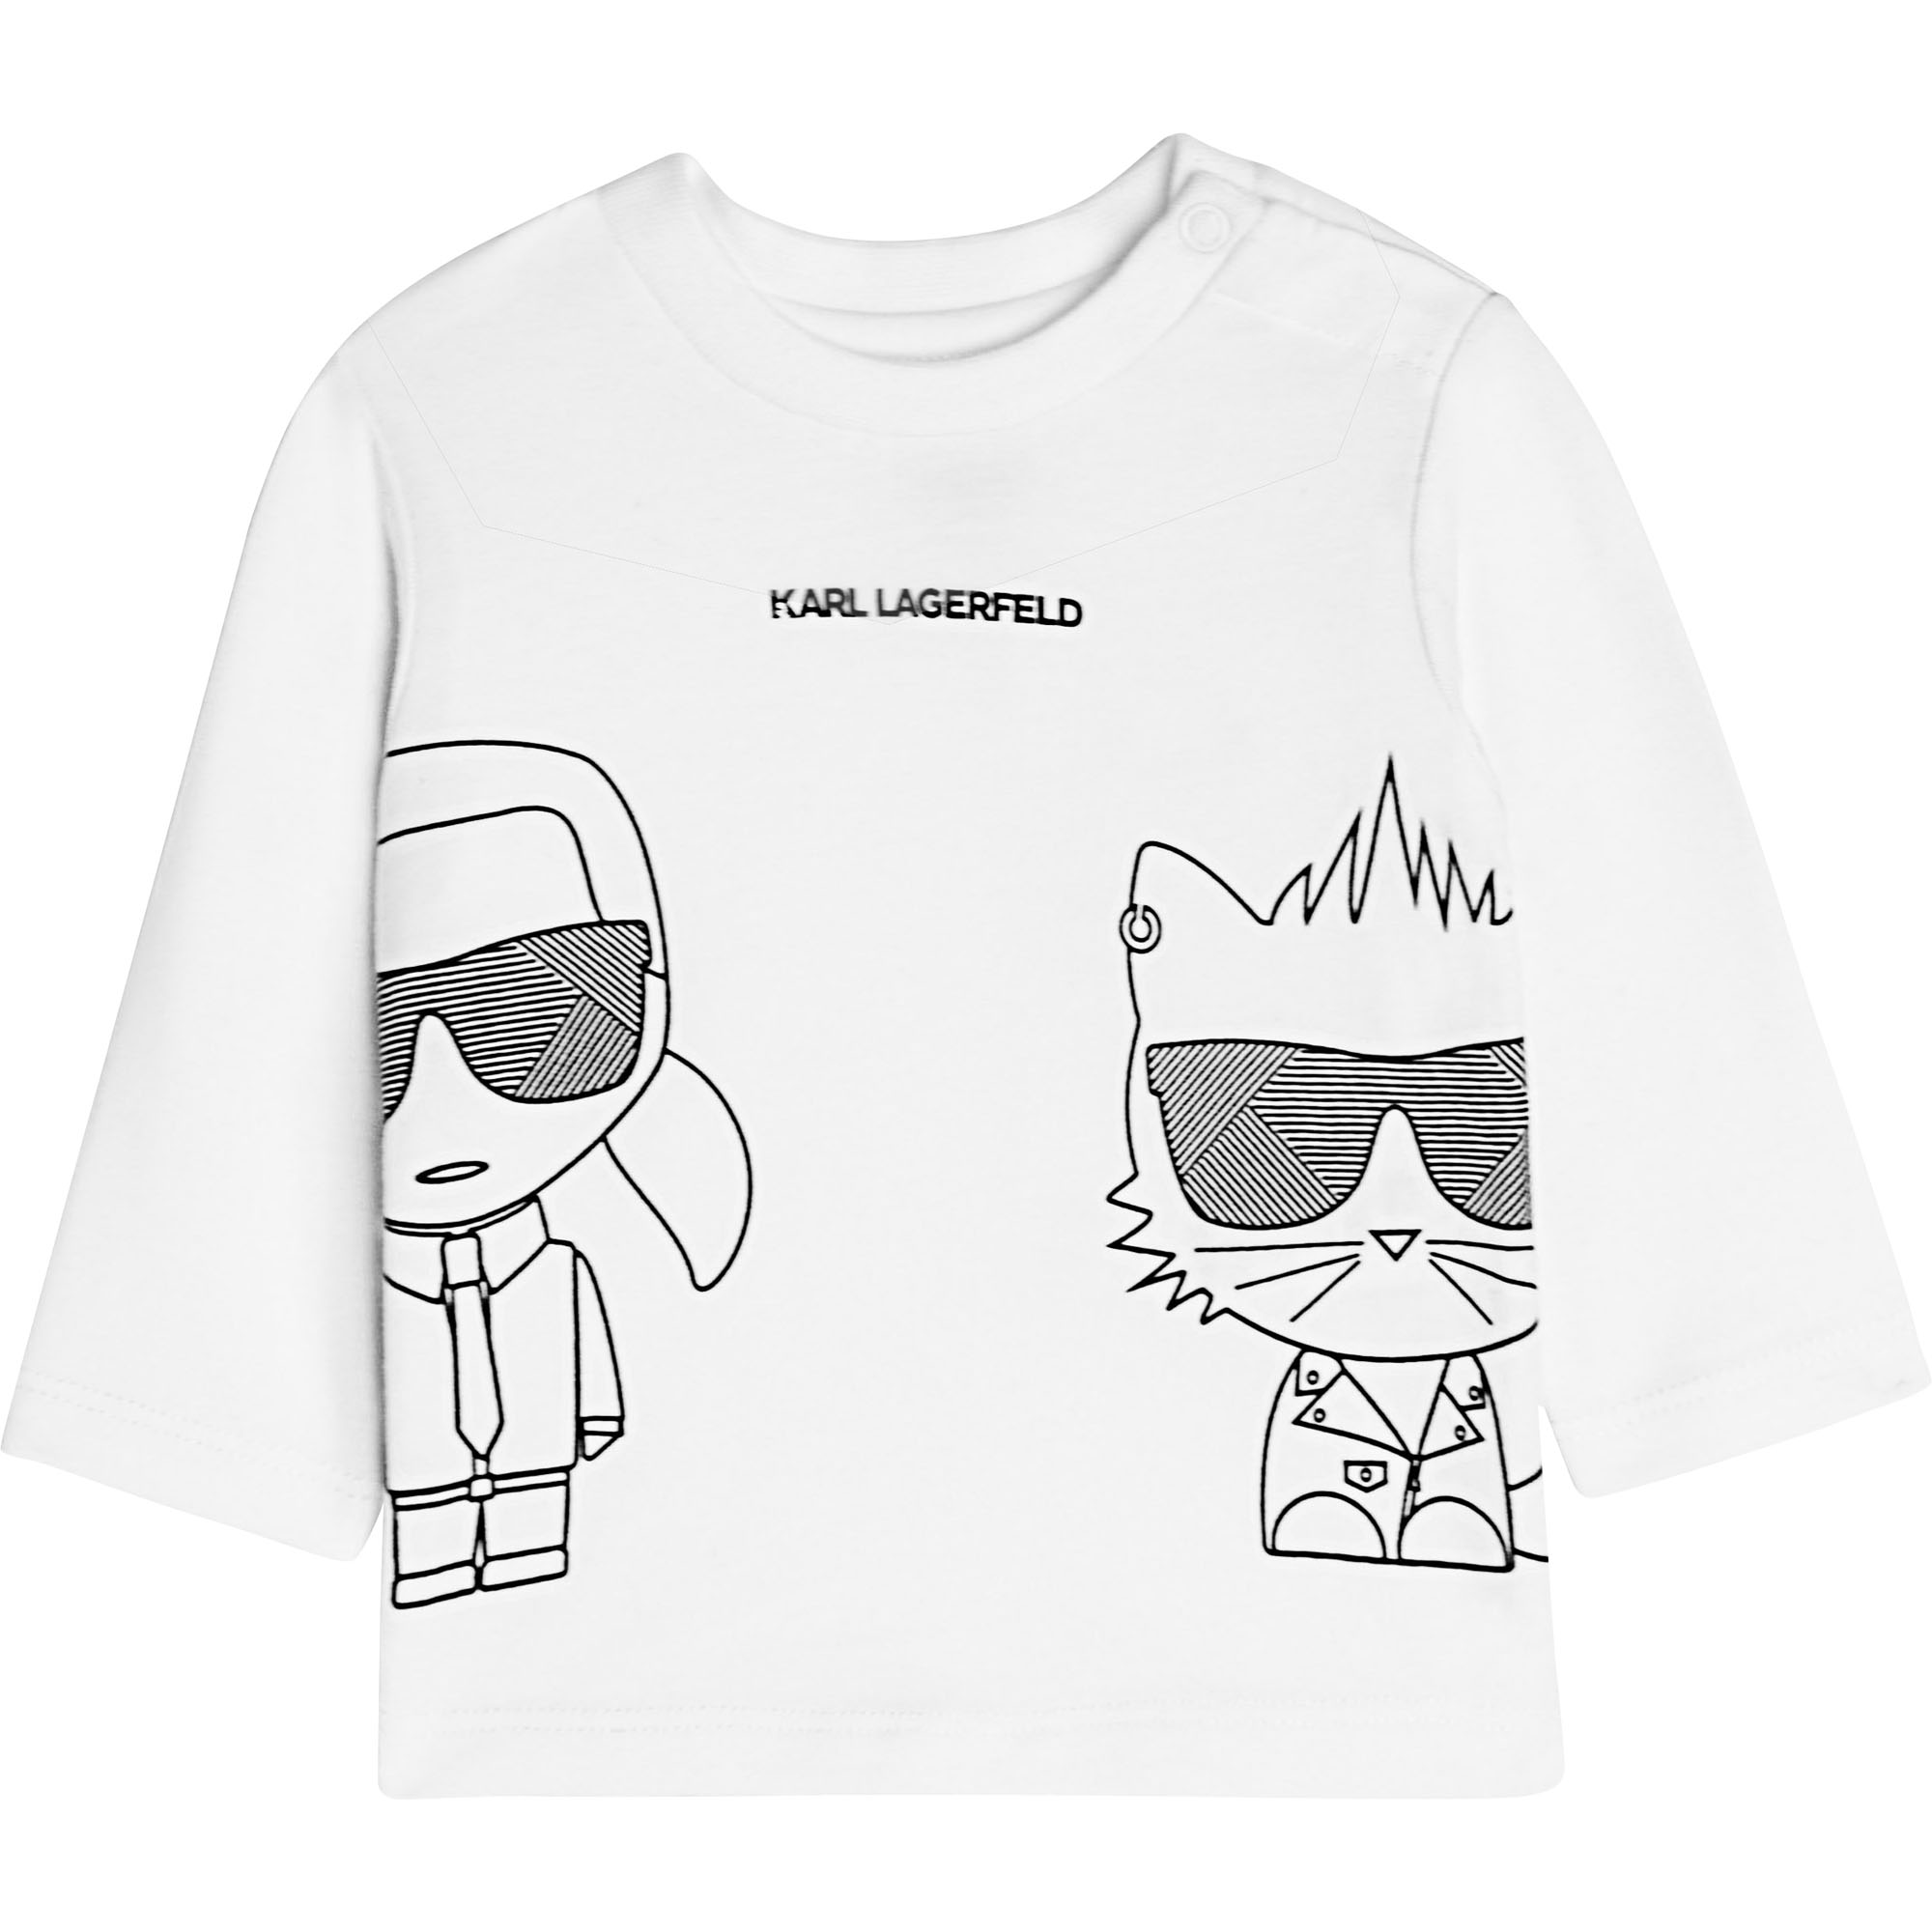 T-shirt and leggings outfit KARL LAGERFELD KIDS for BOY